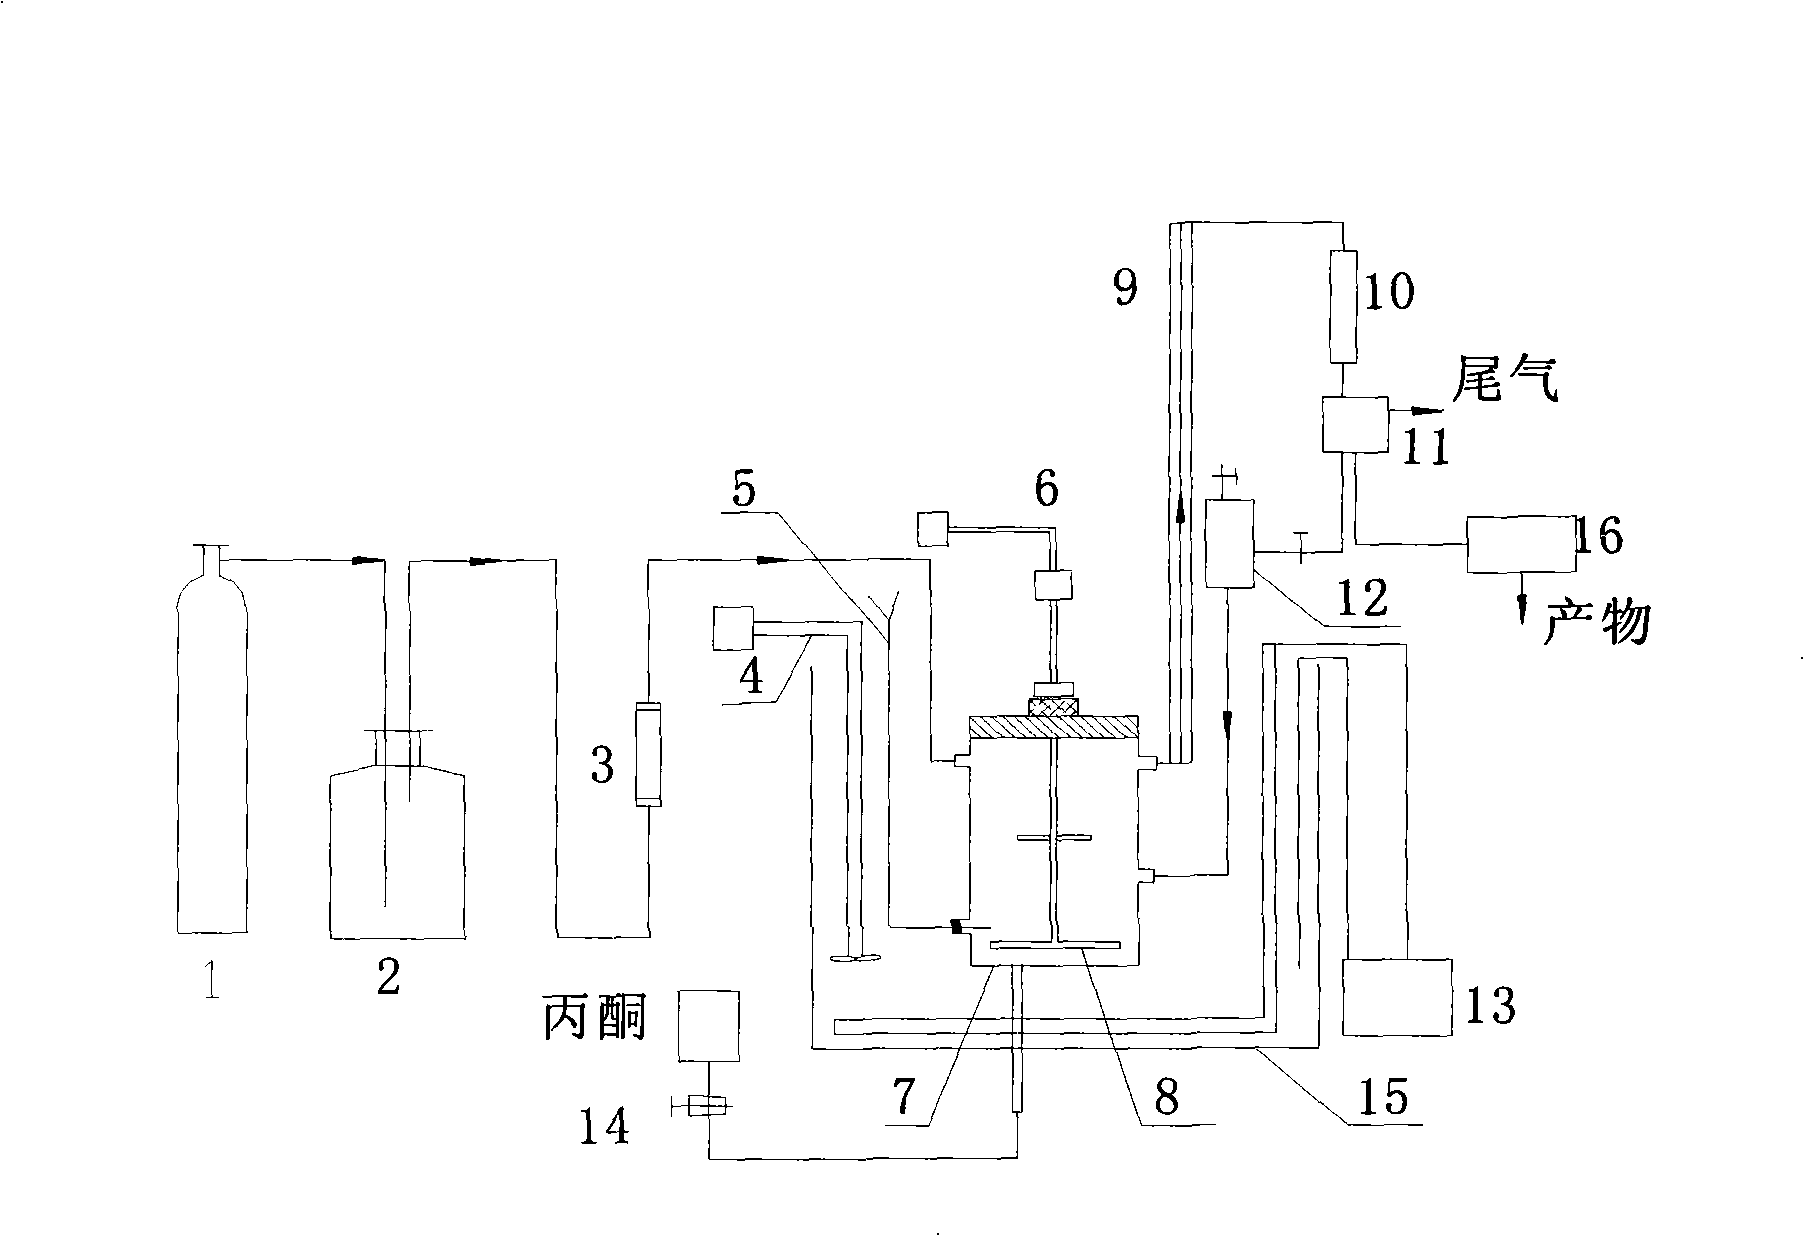 Method for gas stripping and separating hydrazine from hydrazine-containing solution using acetone and use thereof